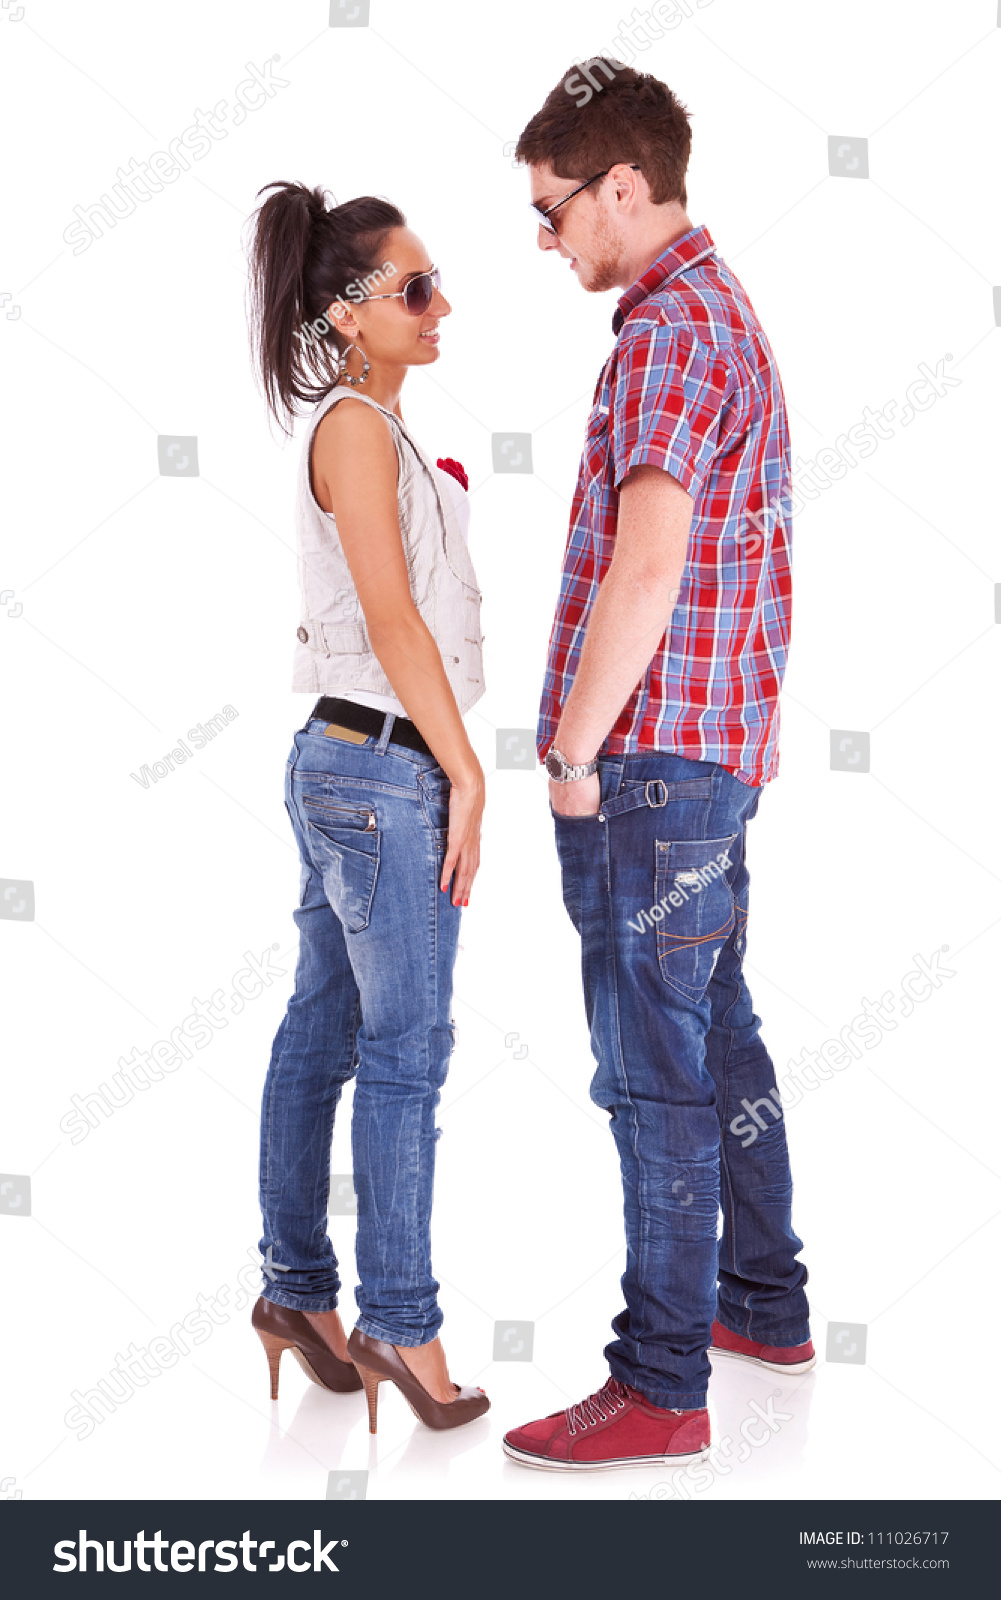 Full Length Picture Cute Couple Standing Stock Photo 111026717 ...